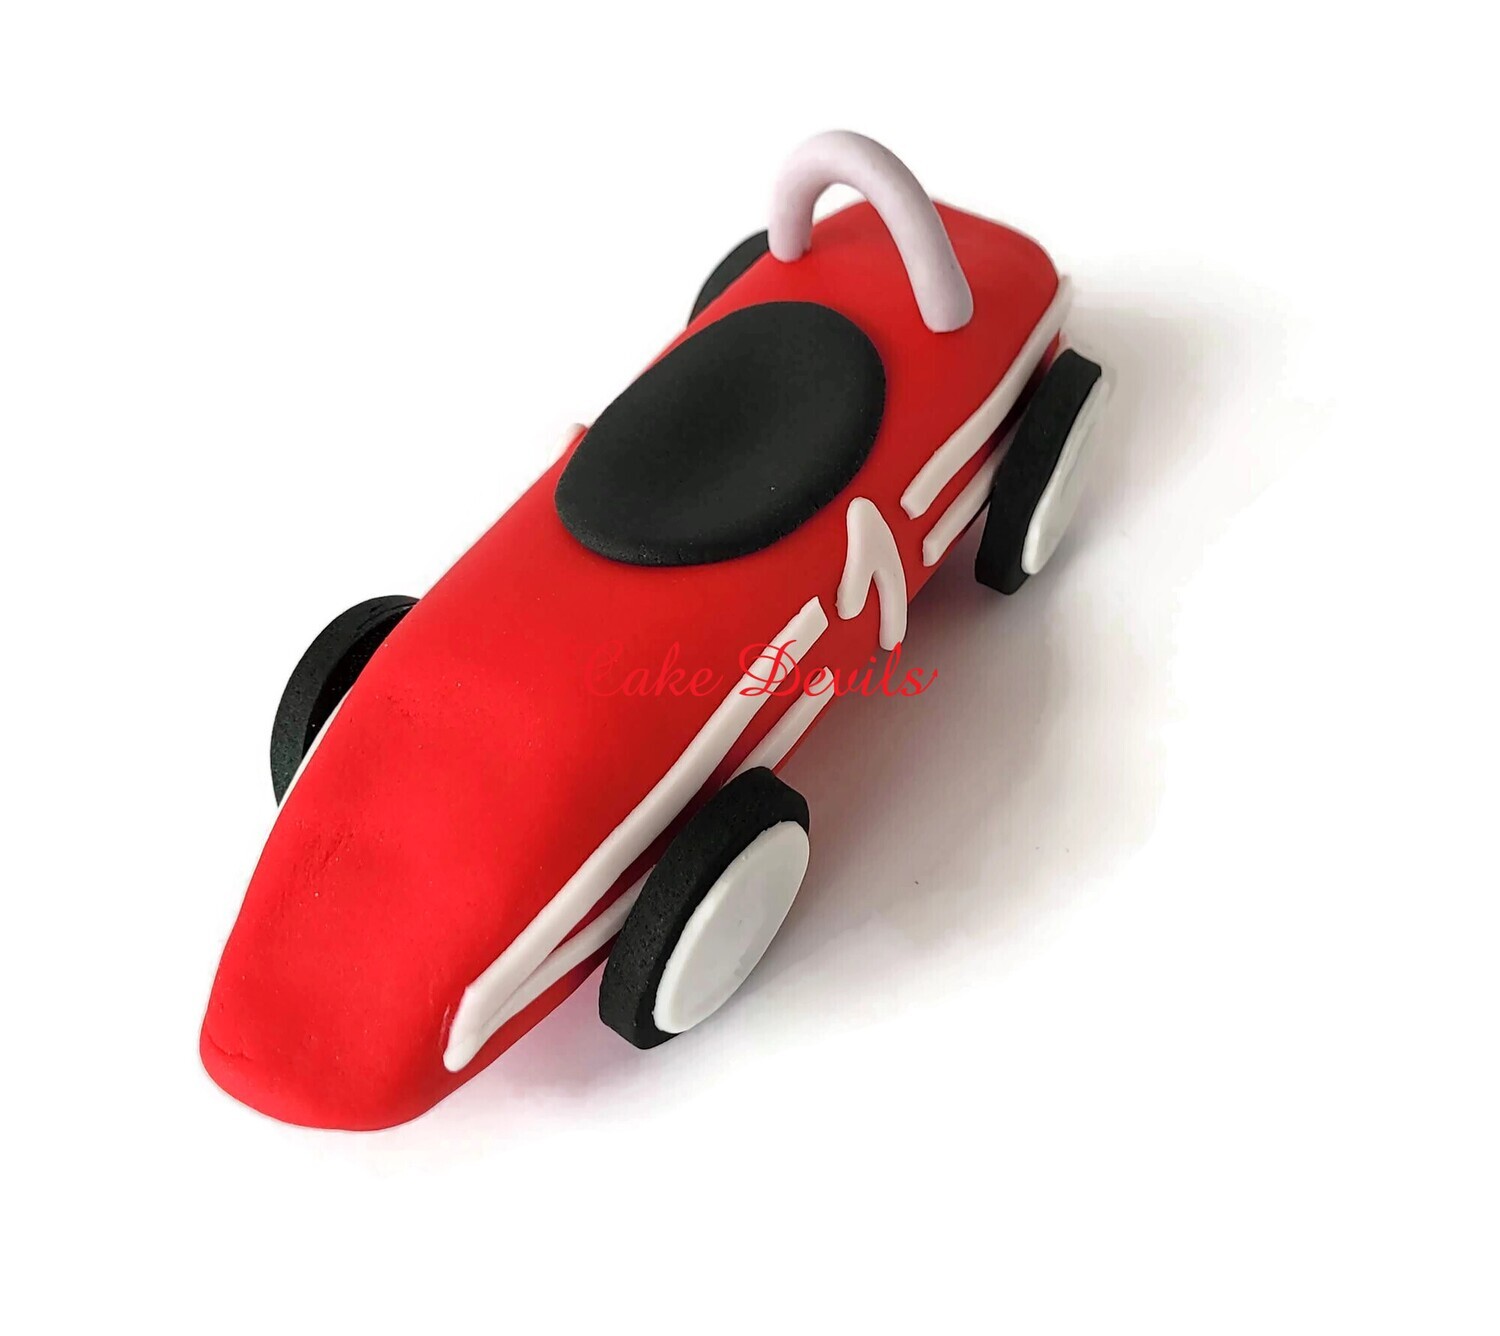 Fondant Classic Vintage Race Car Cake Topper, great for a birthday cake!